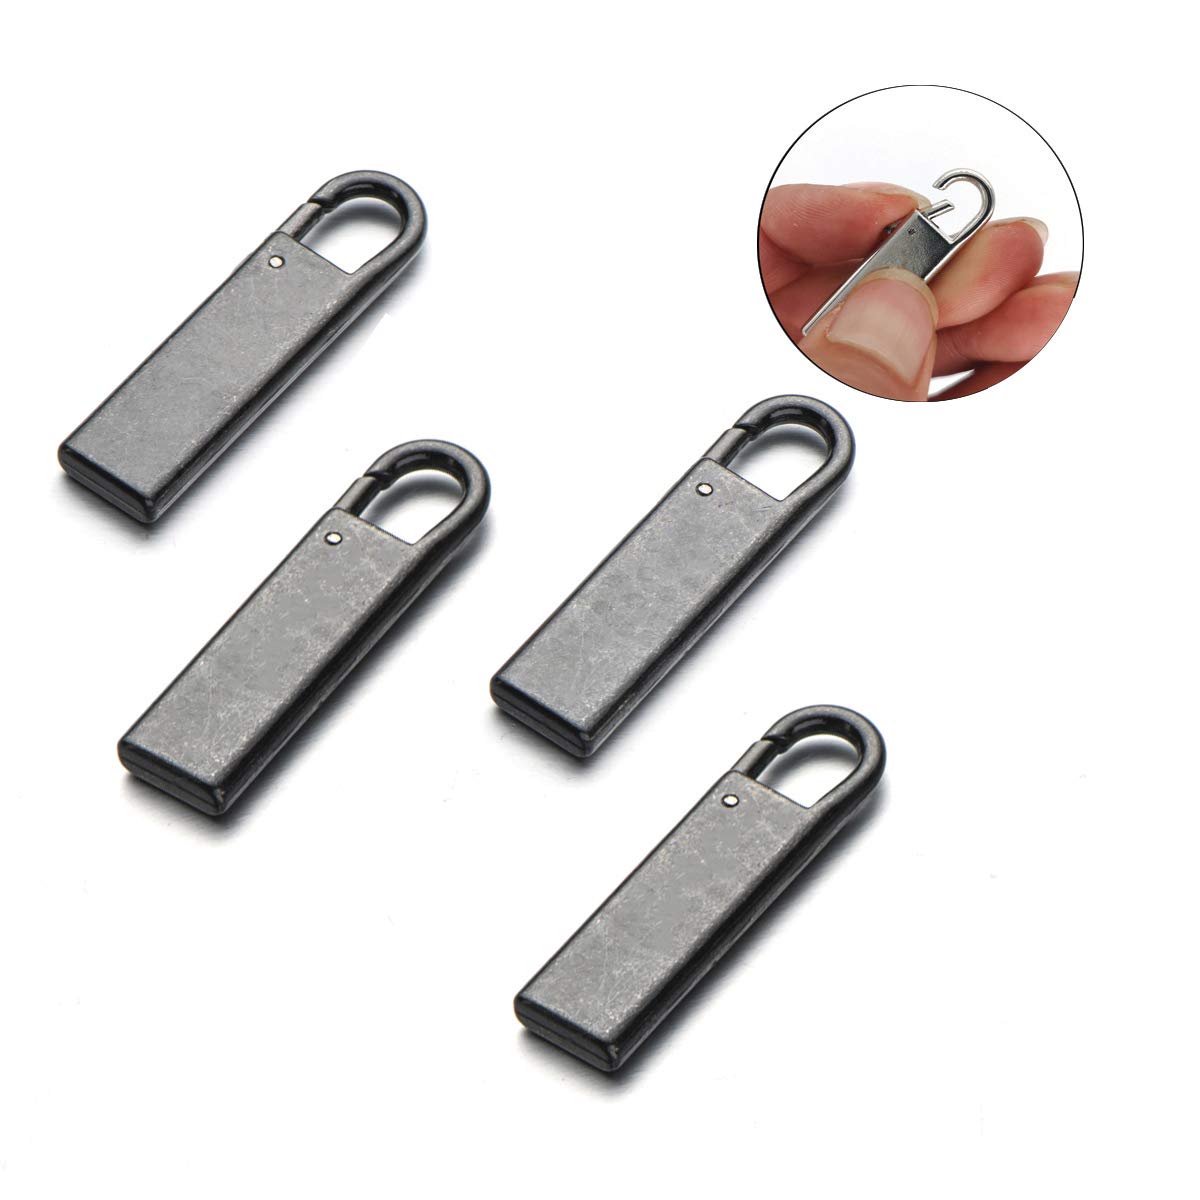  Zpsolution Luggage Zipper Pulls Replacement - Easy Repair for  Broken and Missing Zipper Pulls - 3 Size More Suitable for Different Zippers